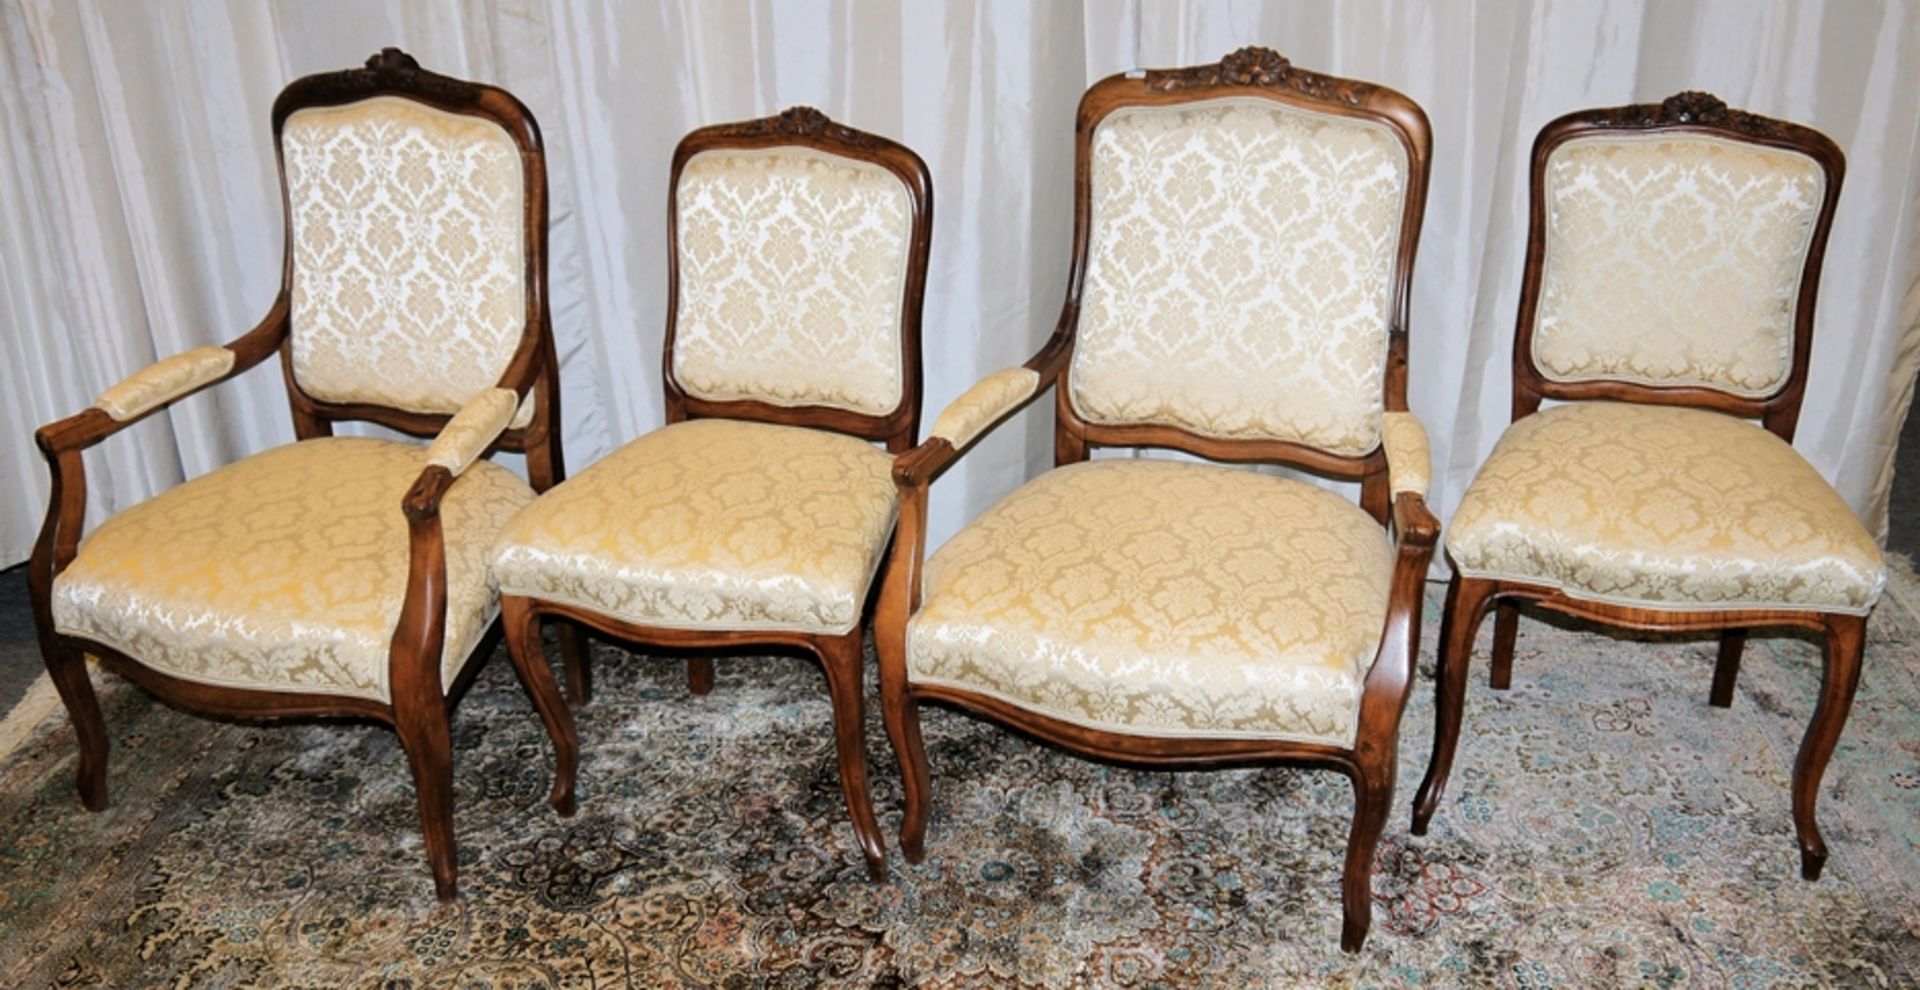 Four Louis Philippe armchairs and chairs, 2nd height 19th century